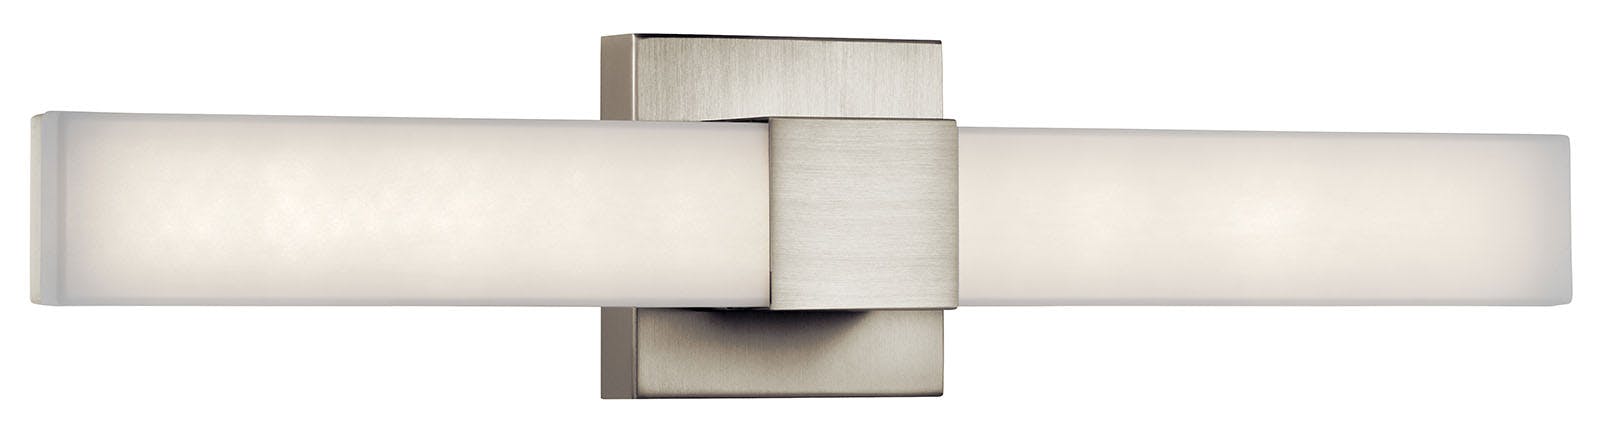 Front view of the Neltev 24" LED Wall Sconce Satin Nickel on a white background